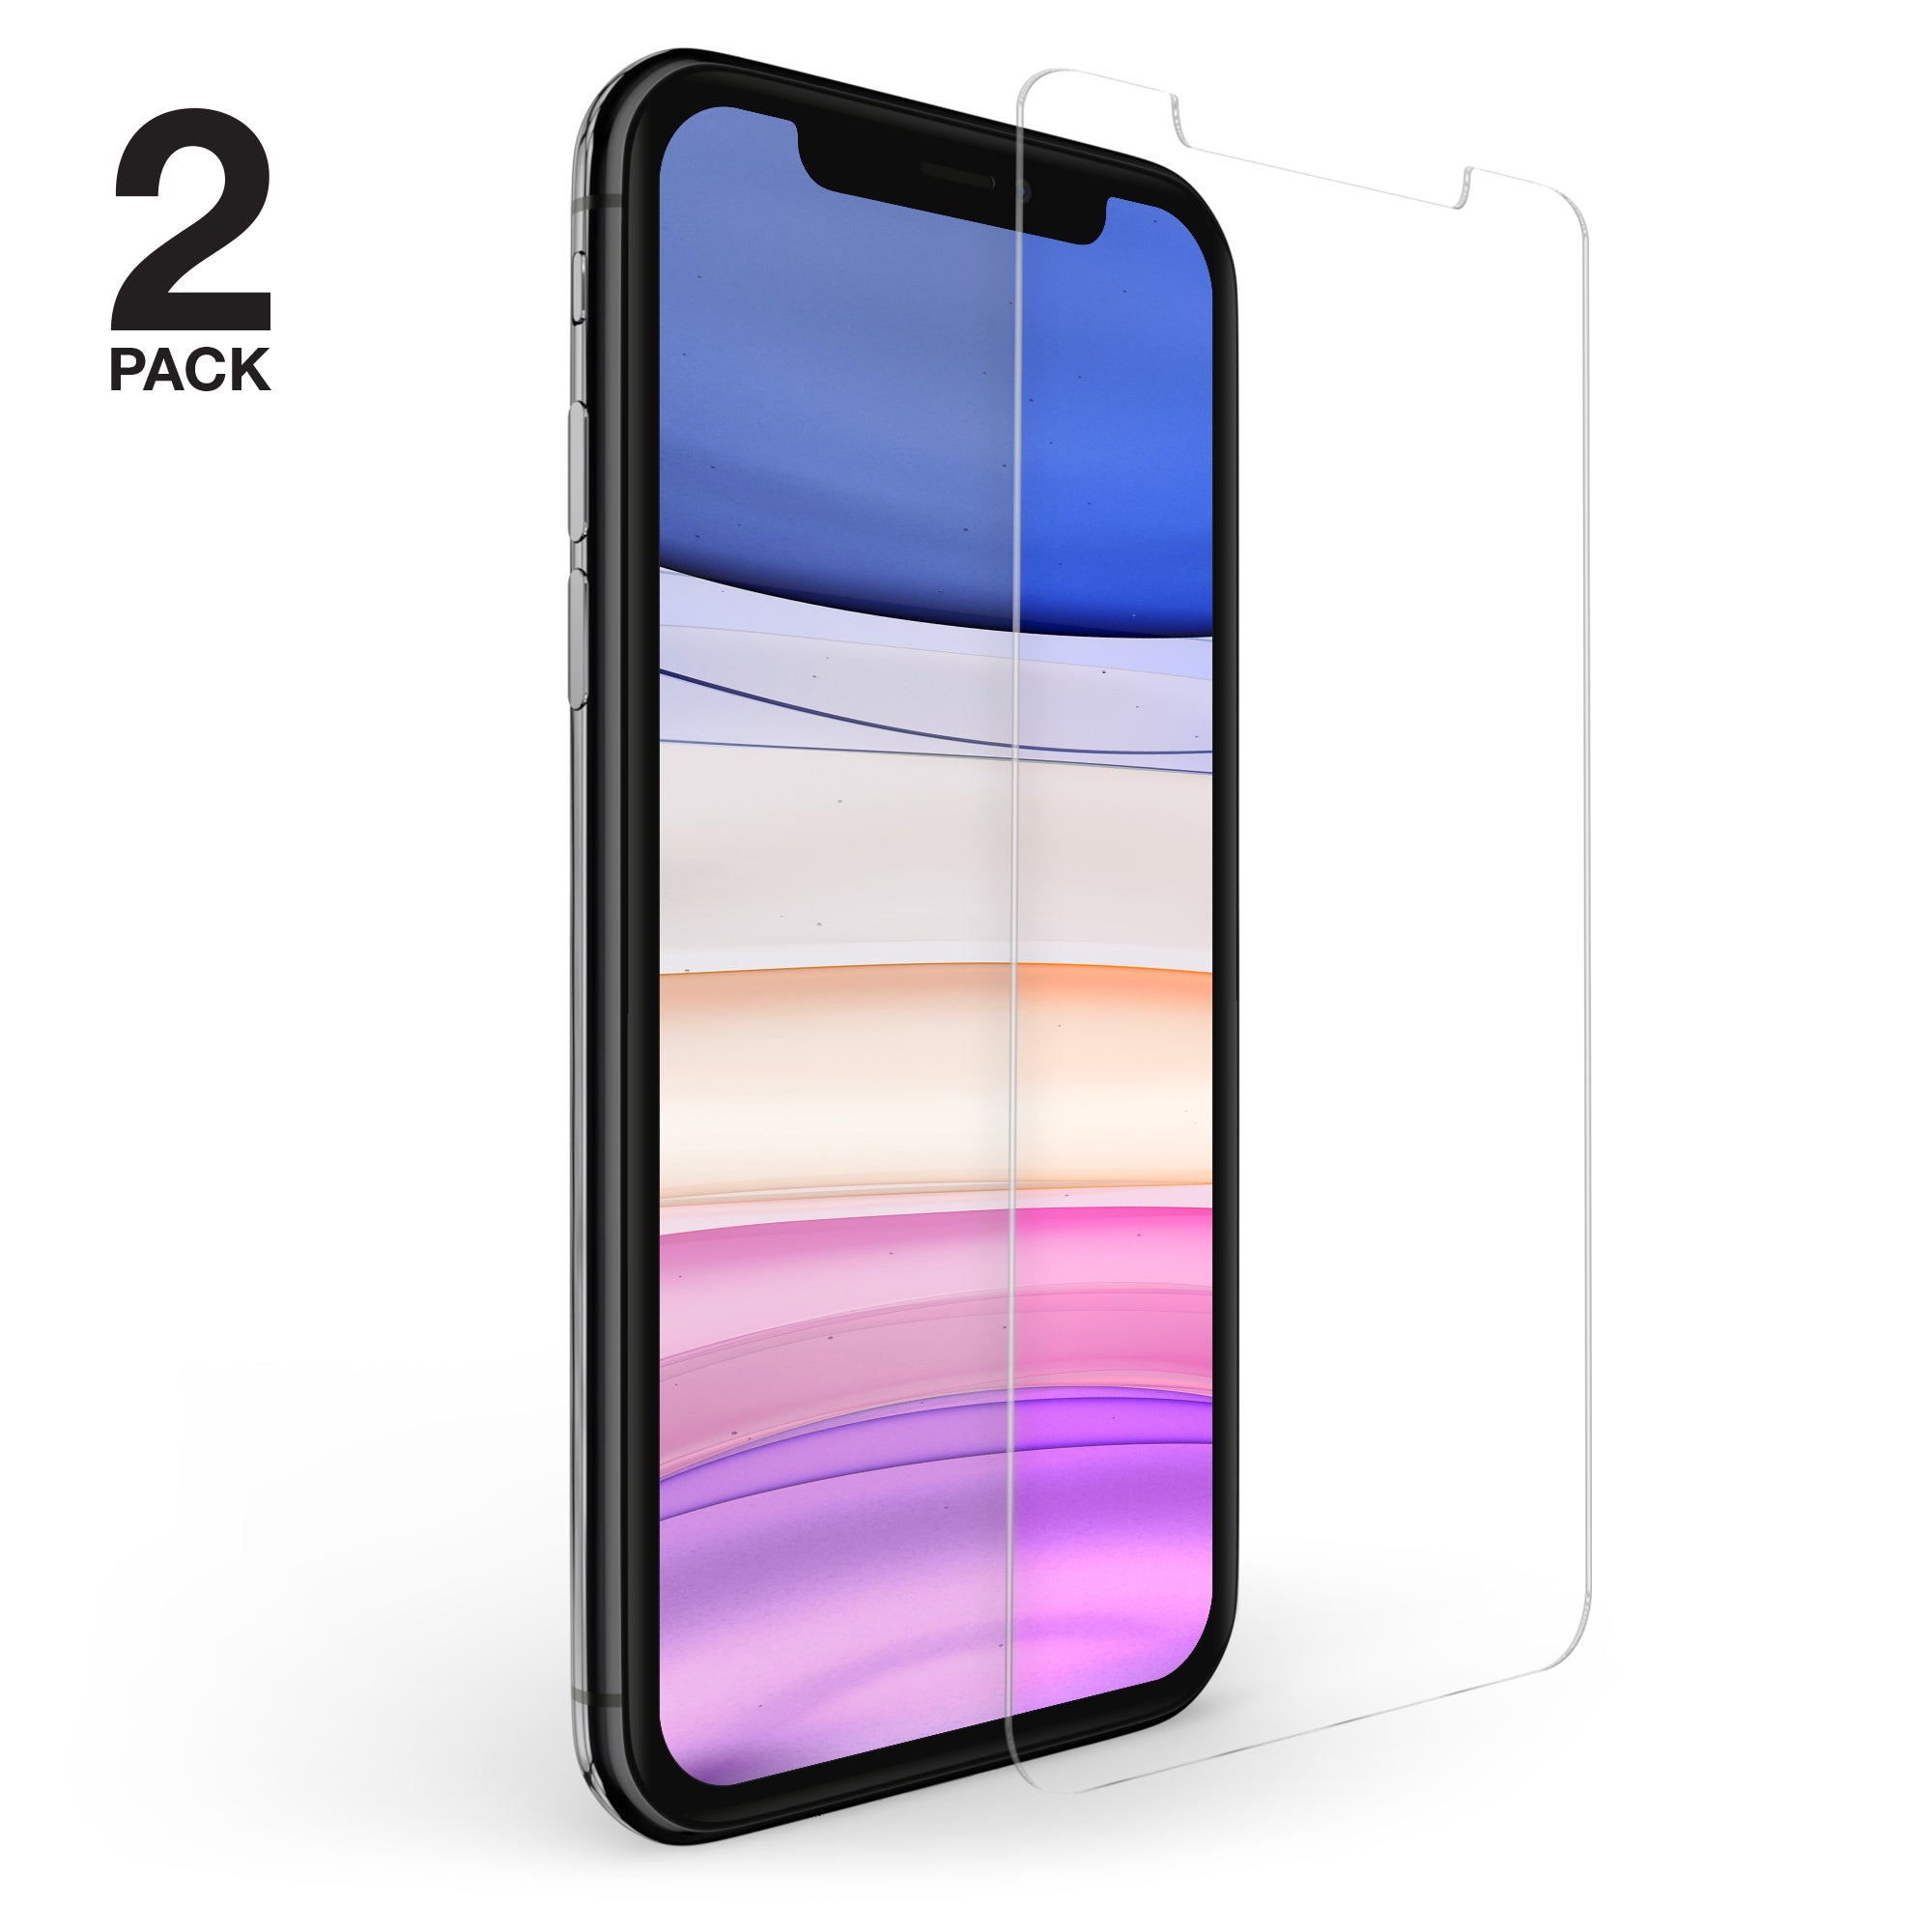 HyperGear HD Tempered Glass Screen Protector for iPhone 11 Pro - 2 Pack –  HYPERGEAR